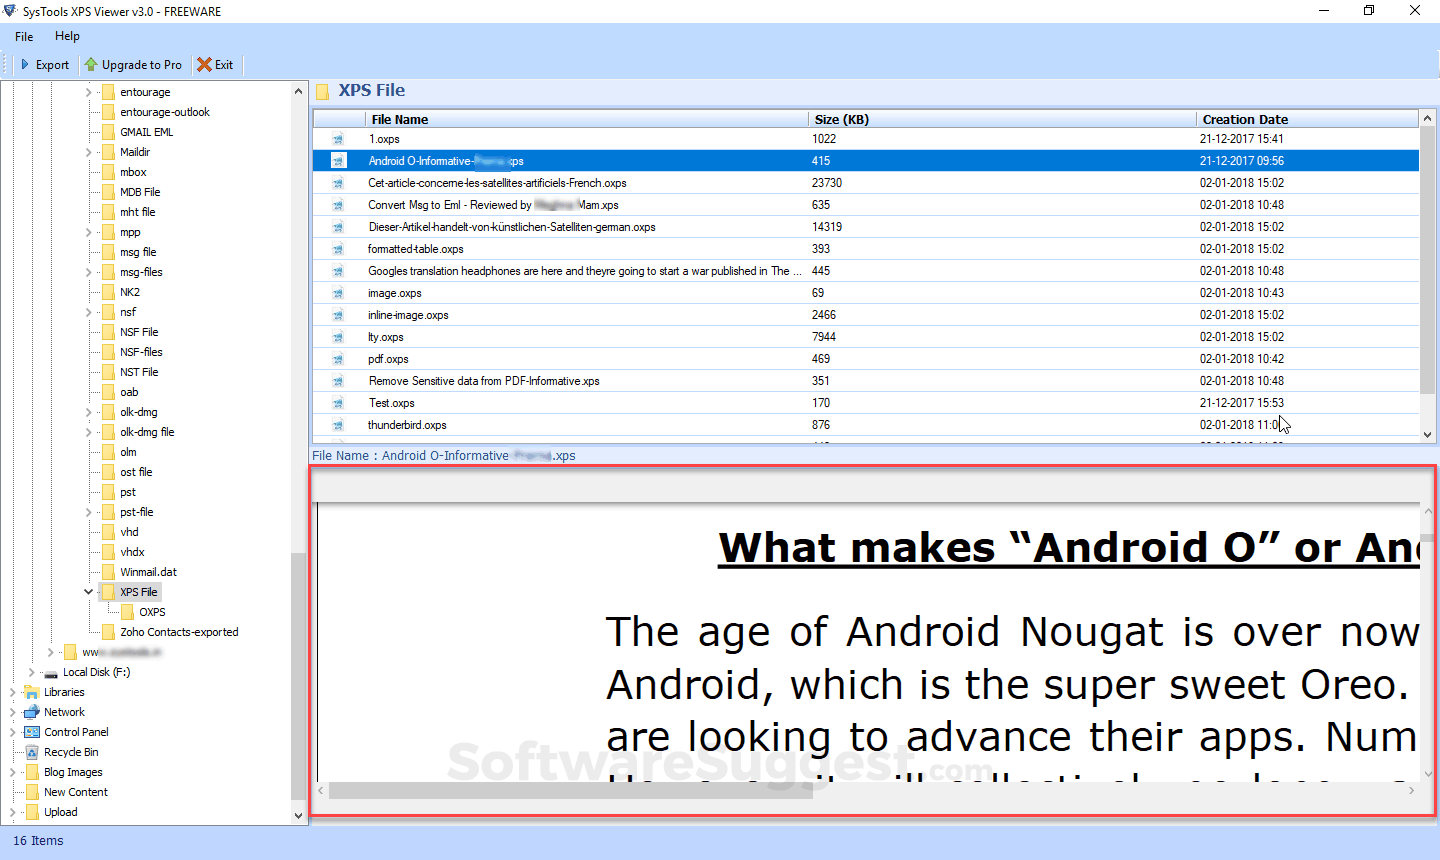 how to open oxps file android